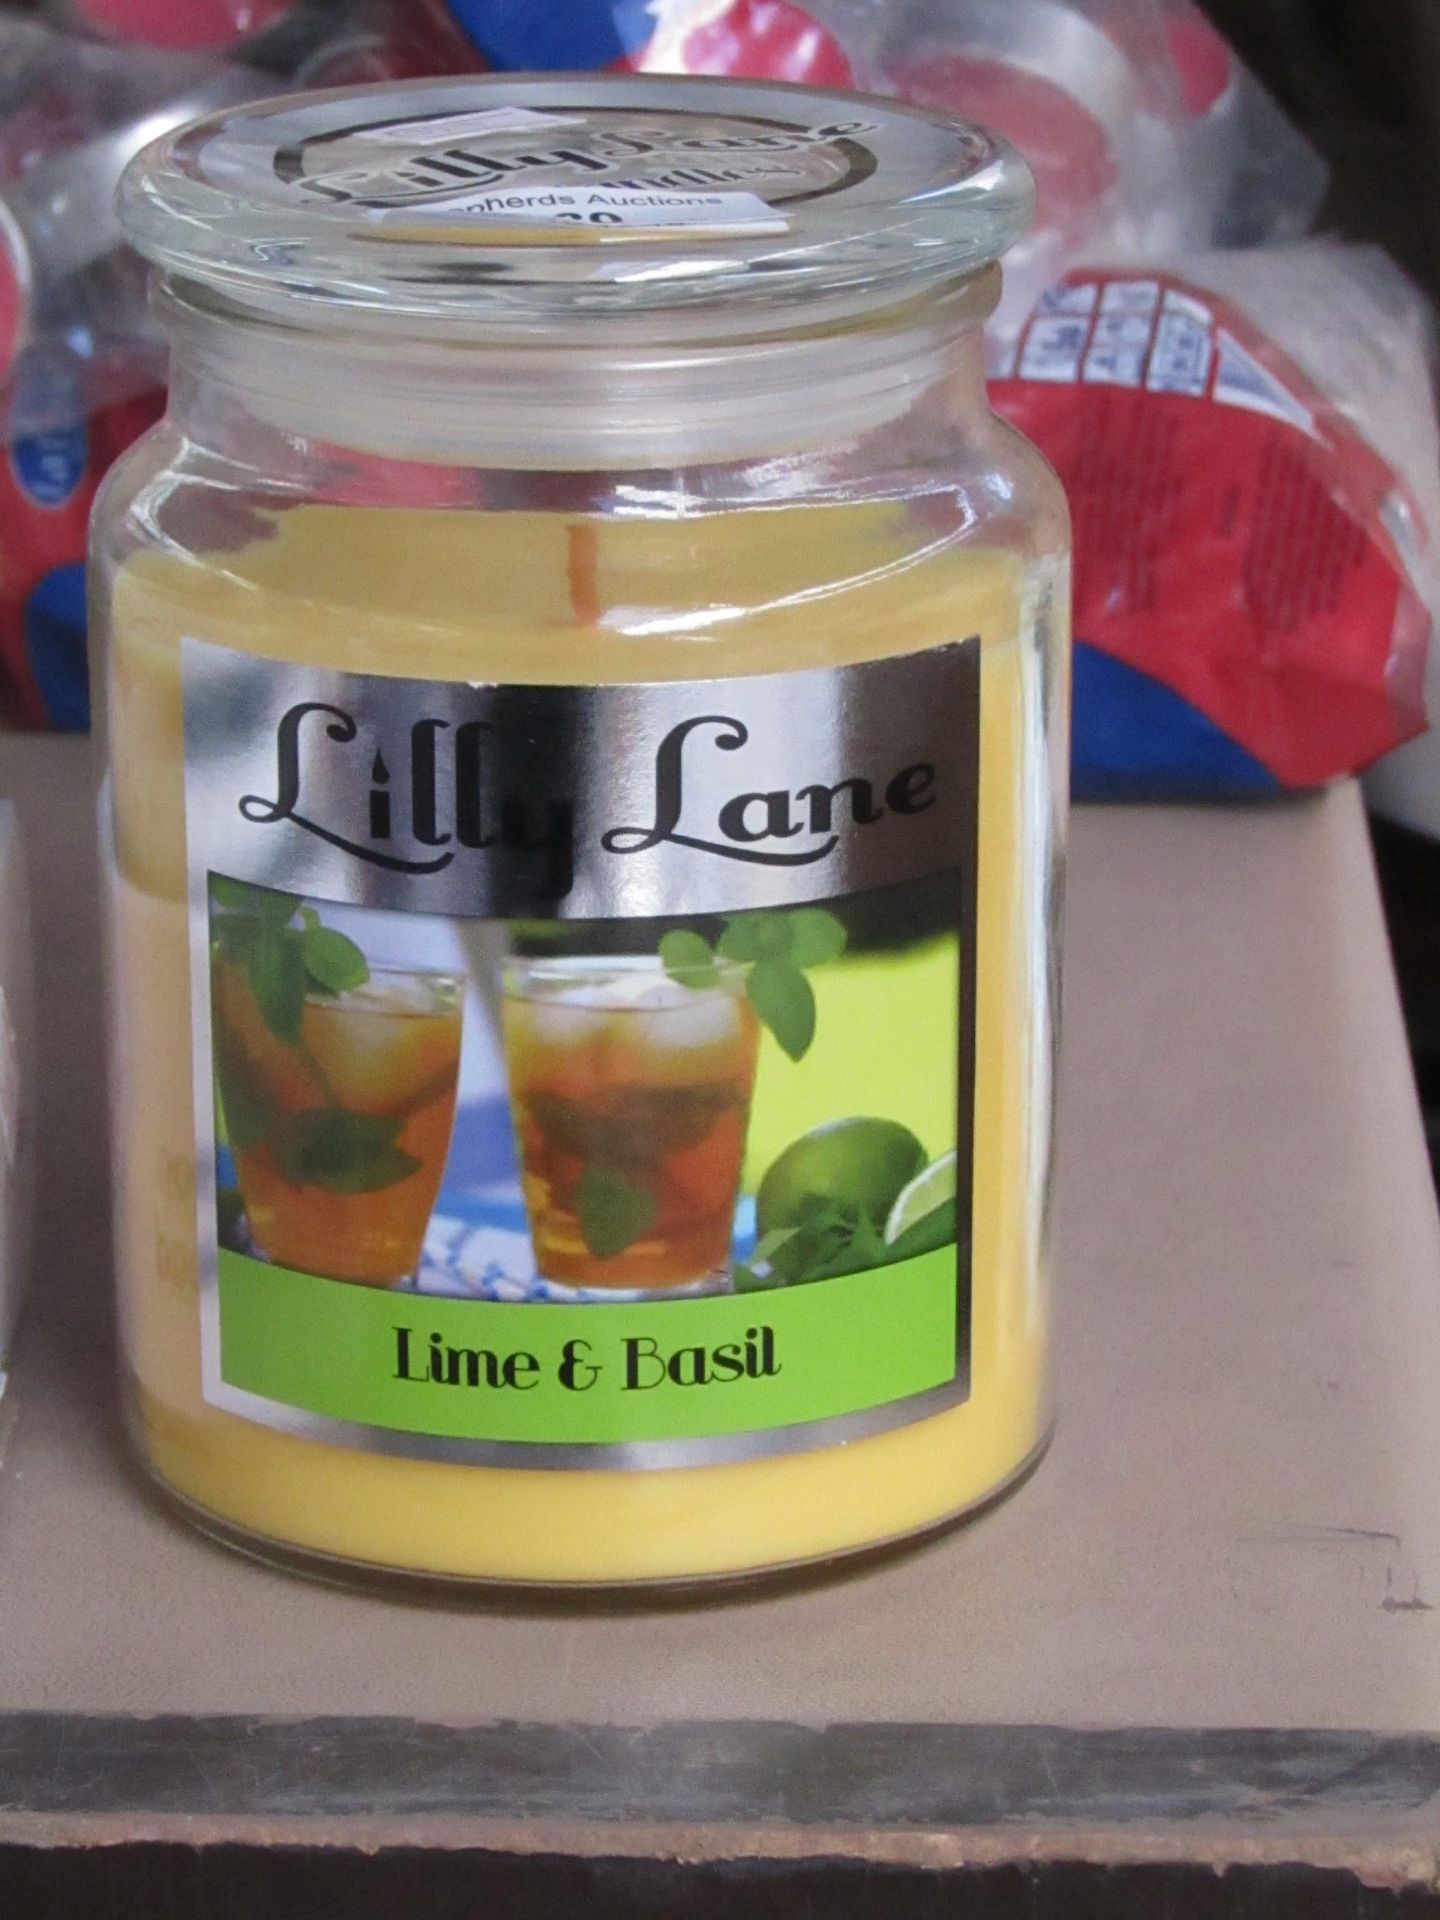 Lilly Lane Lime and basil scented candle, new